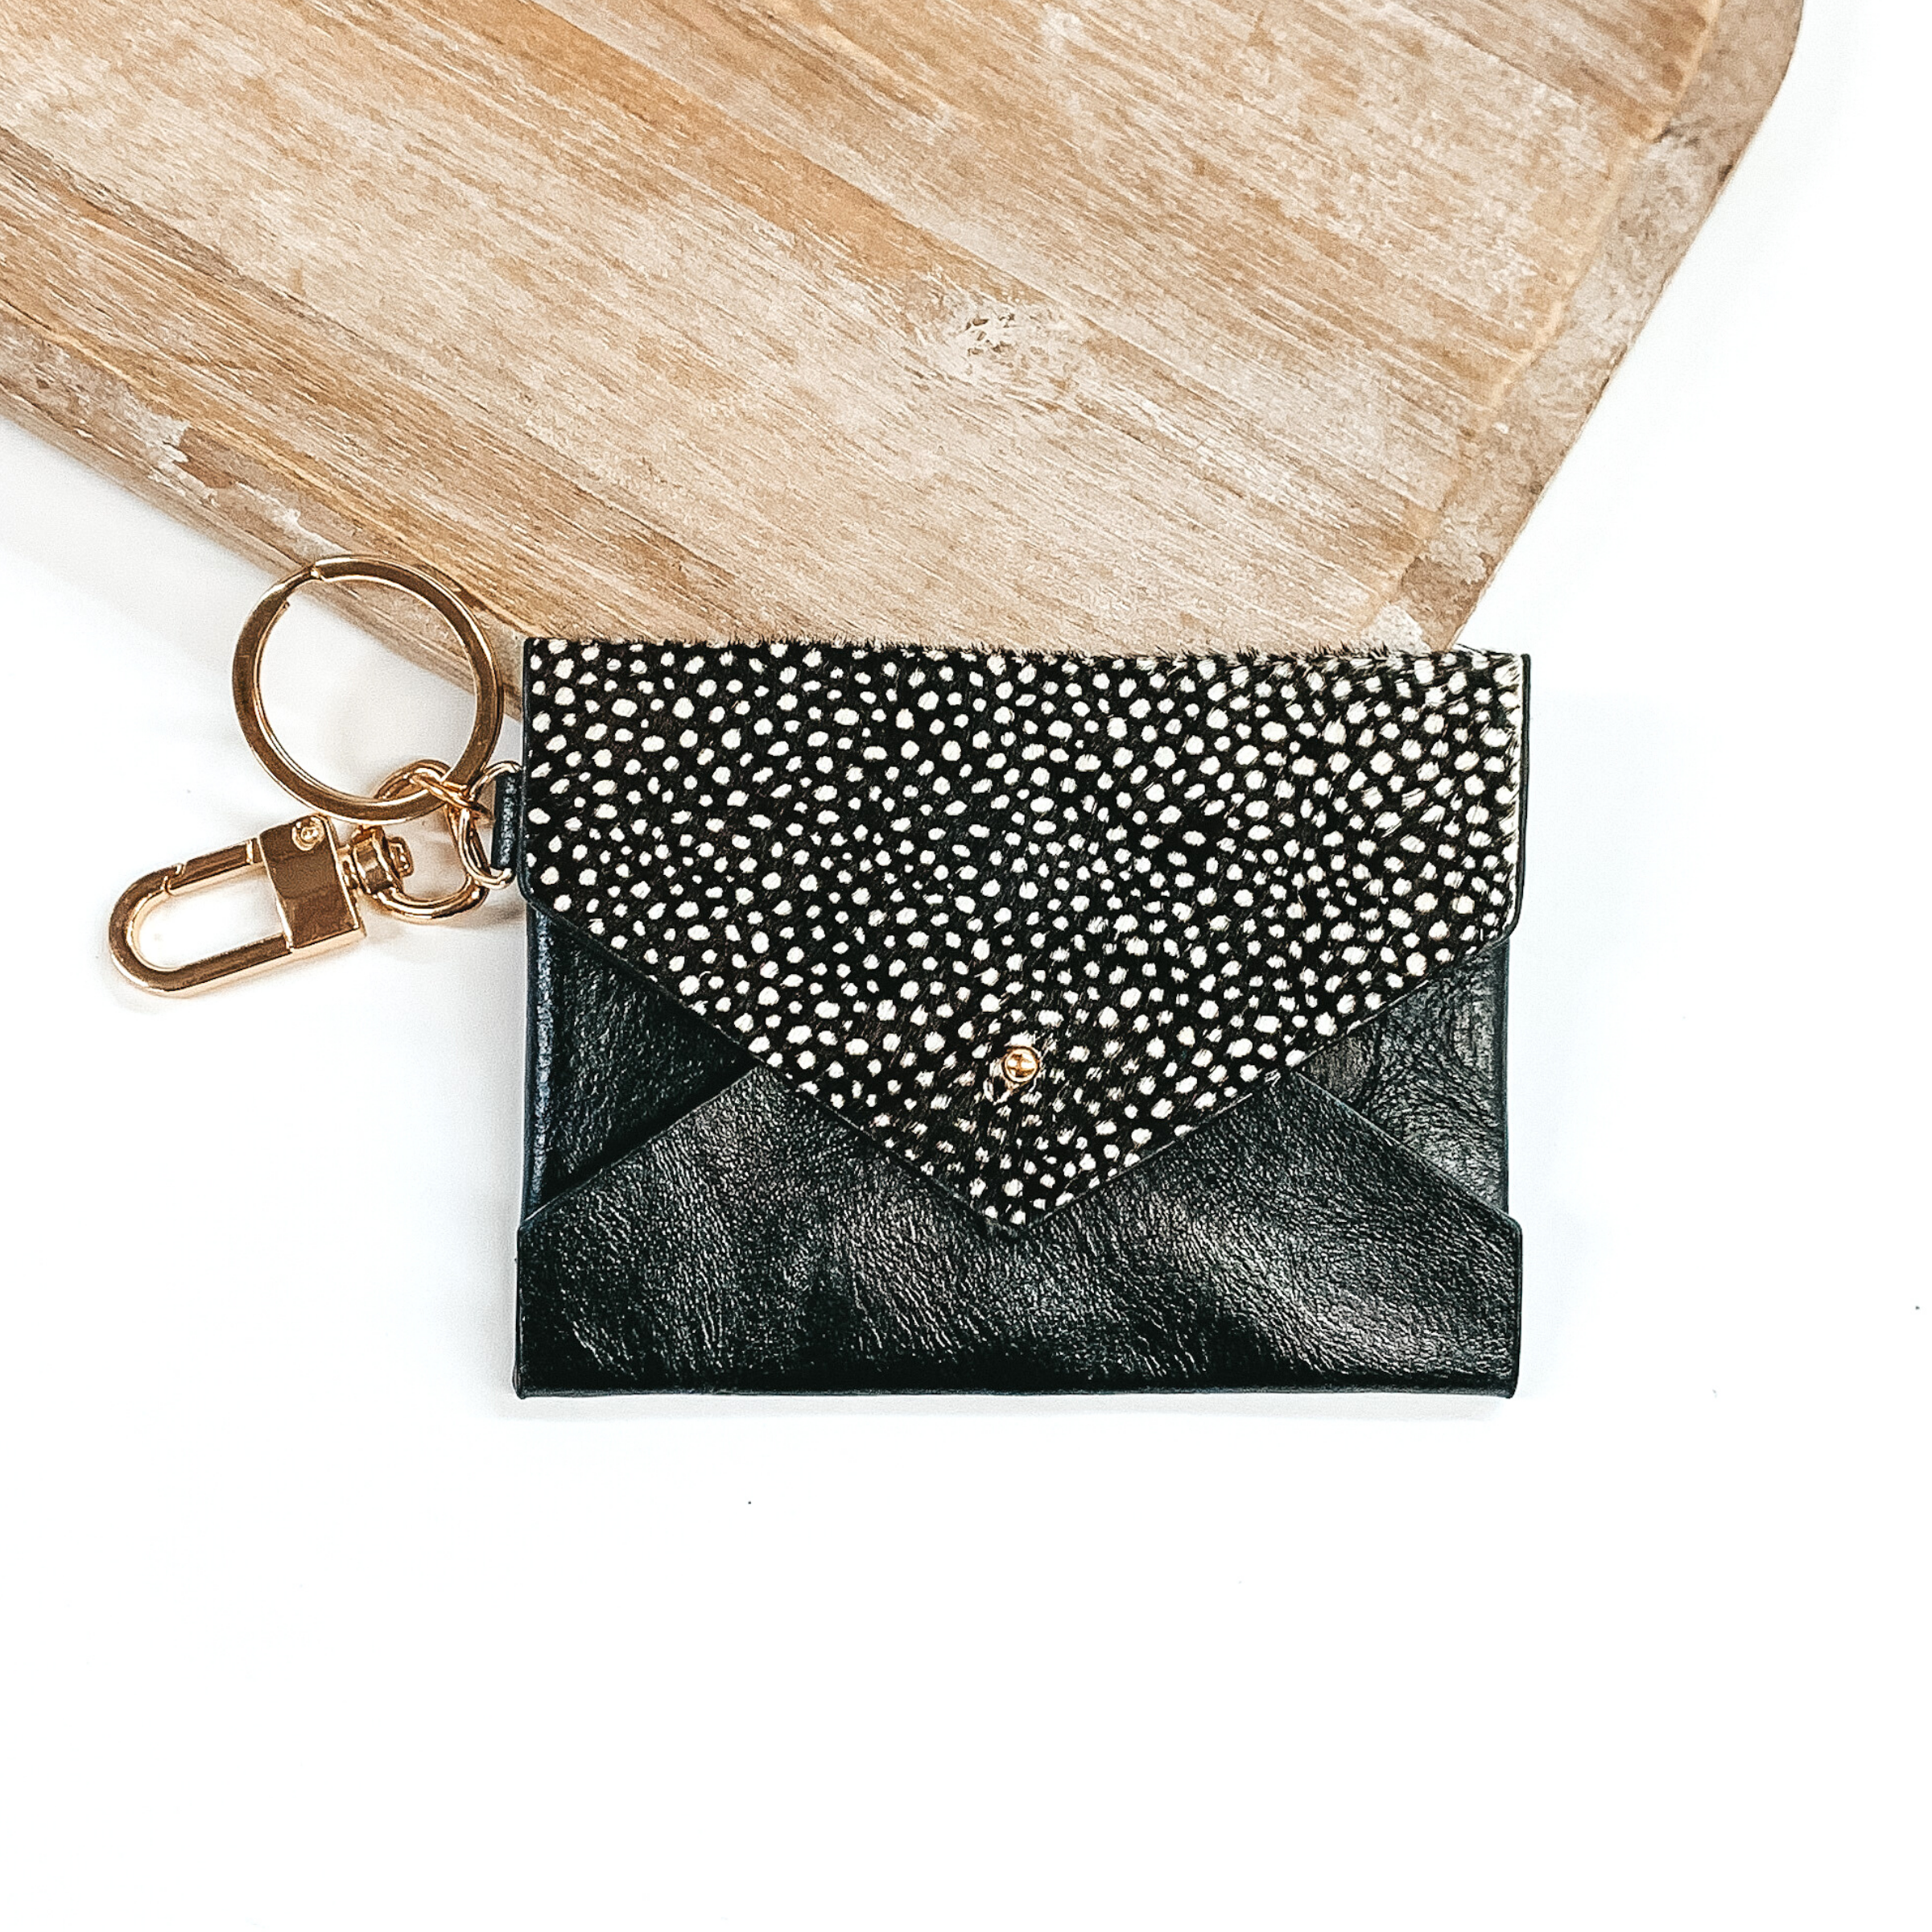 This is a black wallet with a flap that has a black and white dotted print. This wallet has a gold key chain. This wallet keychain is pictured laying on a light colored piece of wood on a white background.